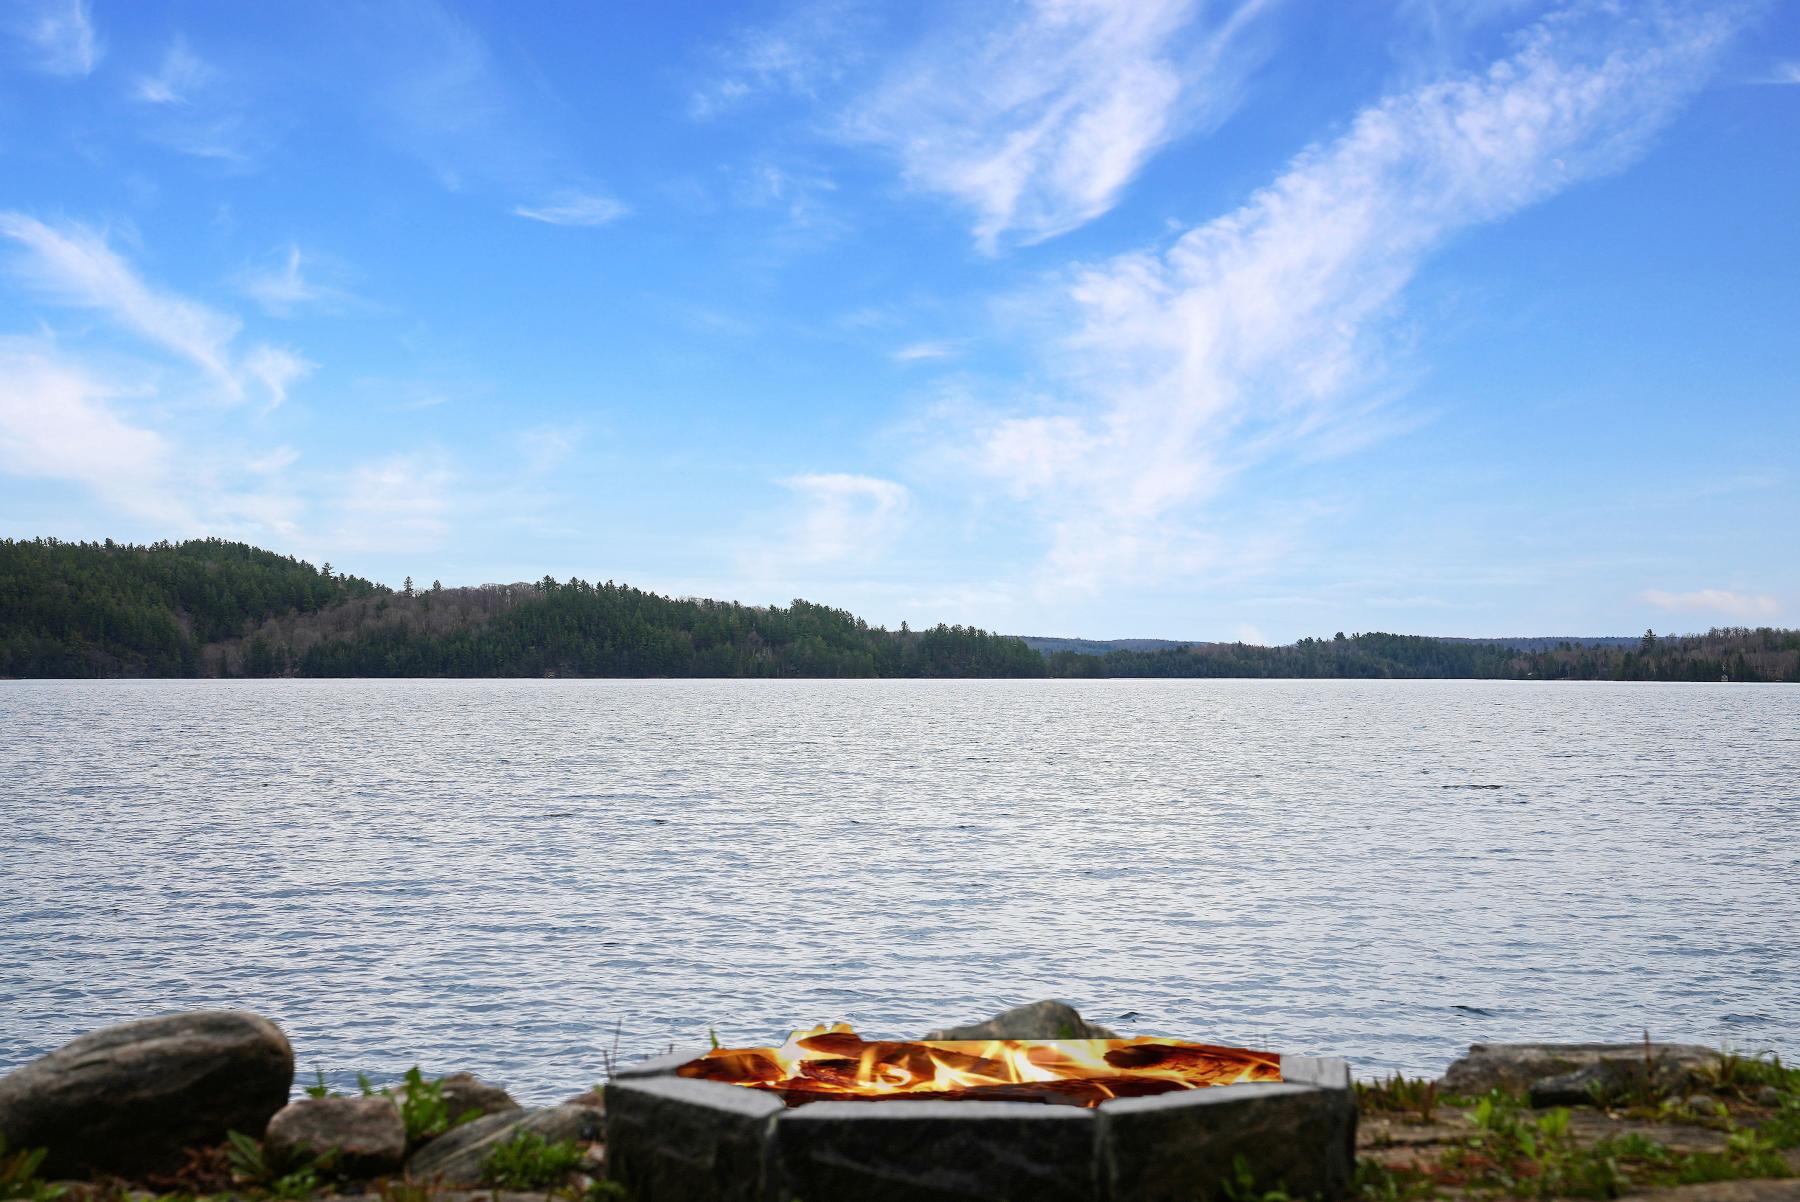 Scenic view of Haliburton Lake looking out over a shoreline firepit on a blue sky sunny day.